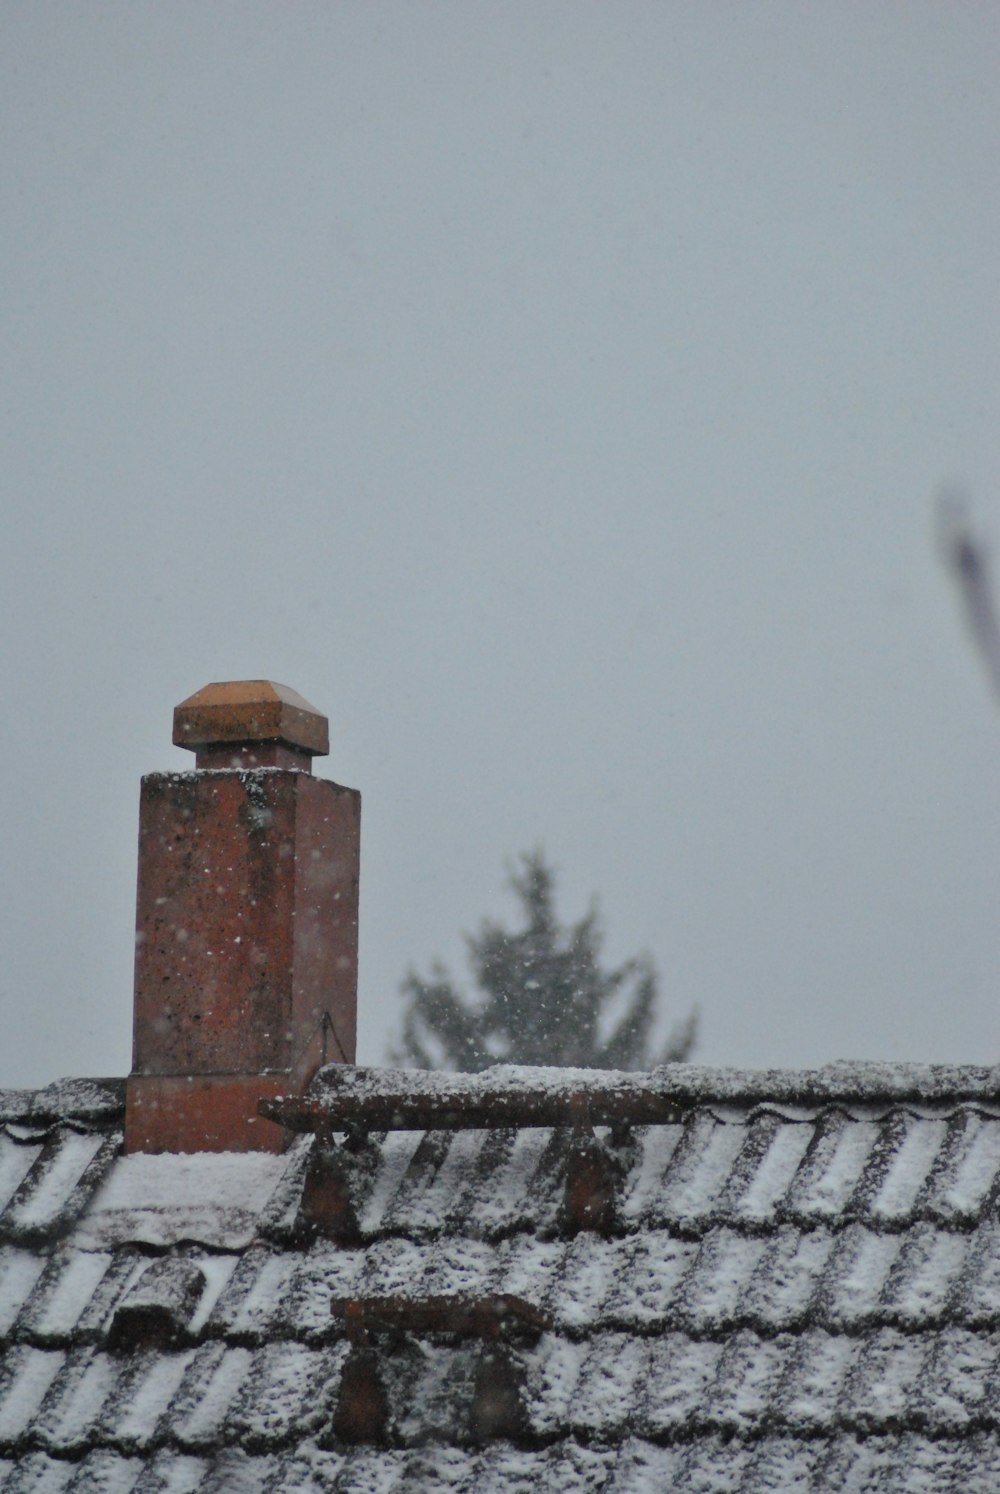 a snow covered roof with a chimney and a tree in the background